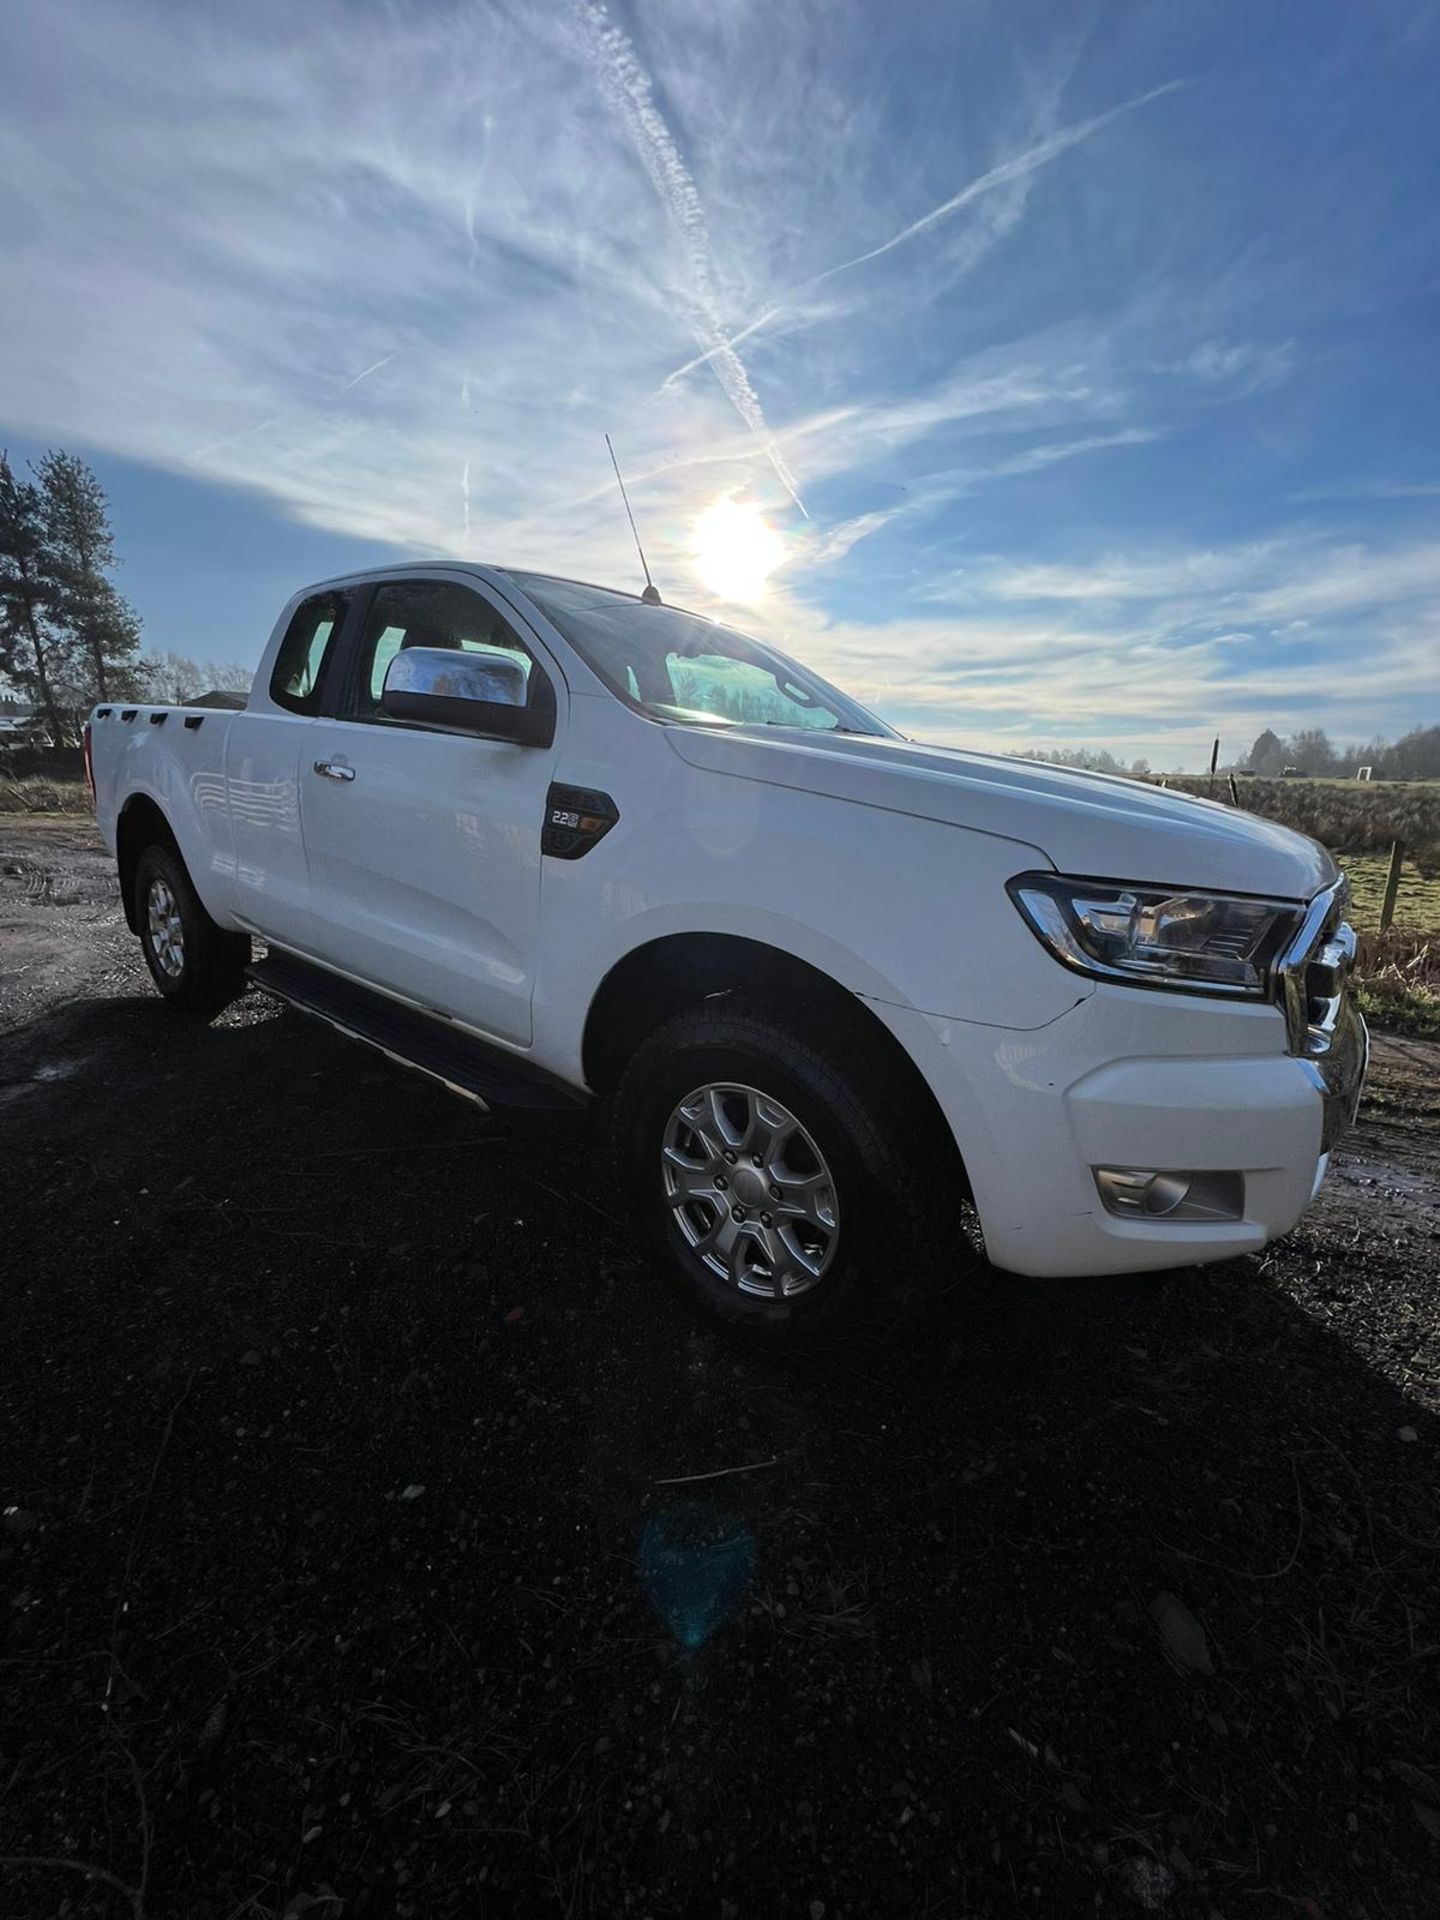 2017 FORD RANGER KING CAB EXSTRA CAB CAB AND HALF - Image 11 of 19